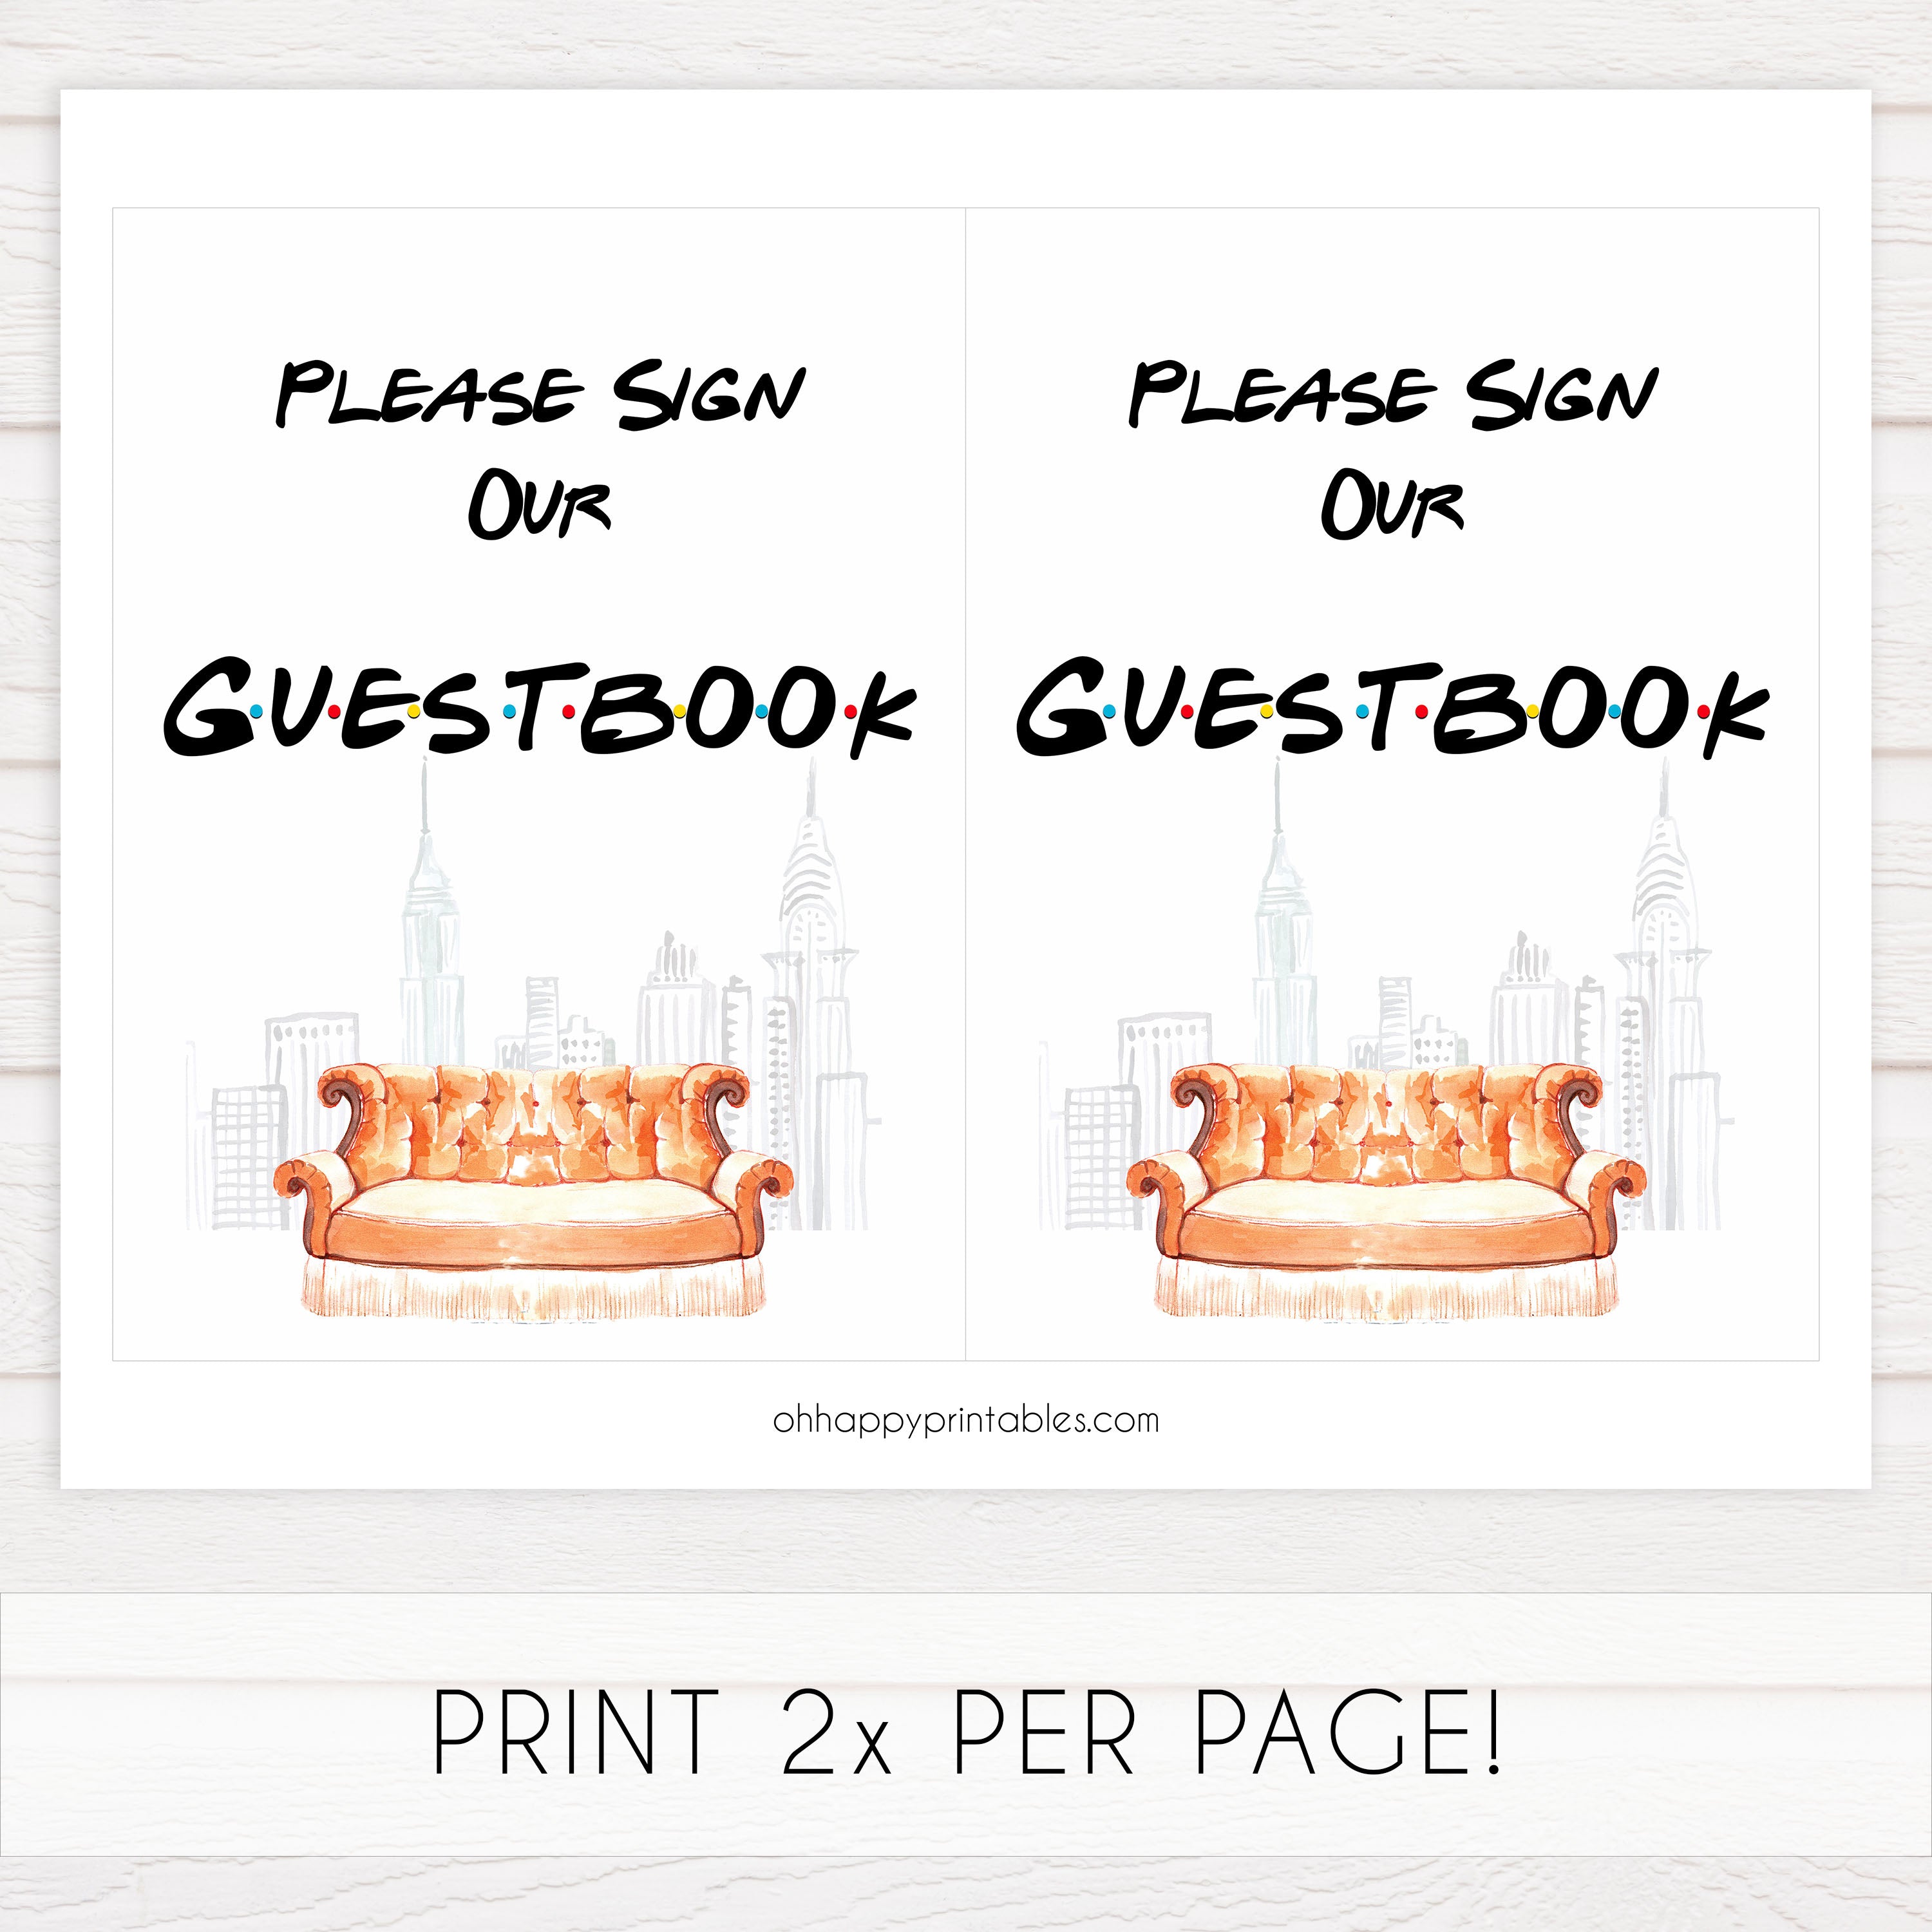 please sign our guestbook sign, guestbook sign, Printable bridal shower signs, friends bridal shower decor, friends bridal shower decor ideas, fun bridal shower decor, bridal shower game ideas, friends bridal shower ideas